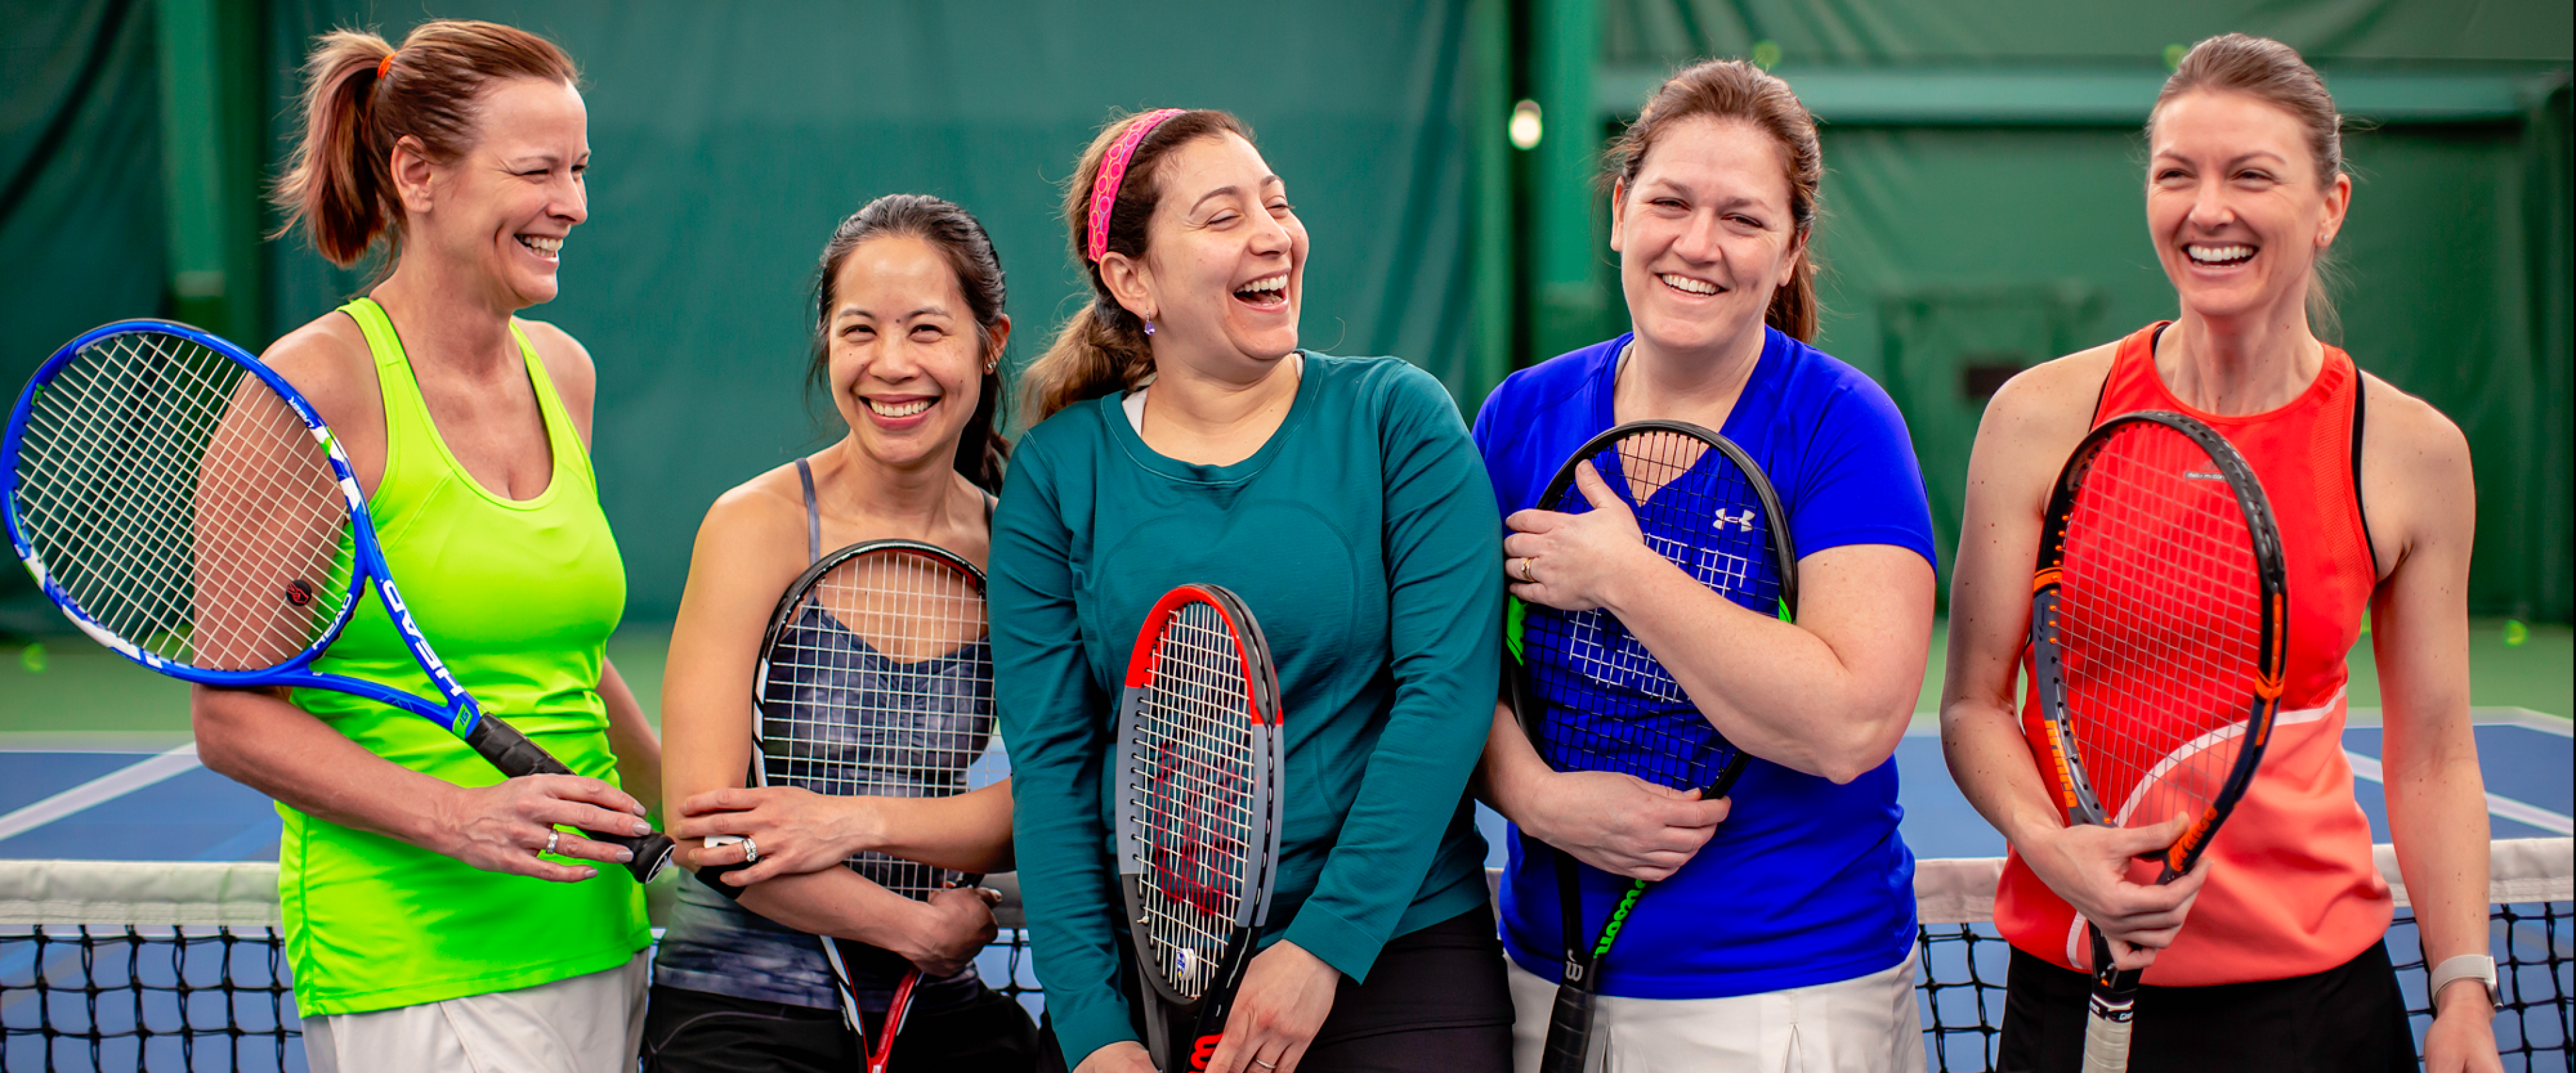 A bunch of ladies at the net holding their tennis rackets and laughing.